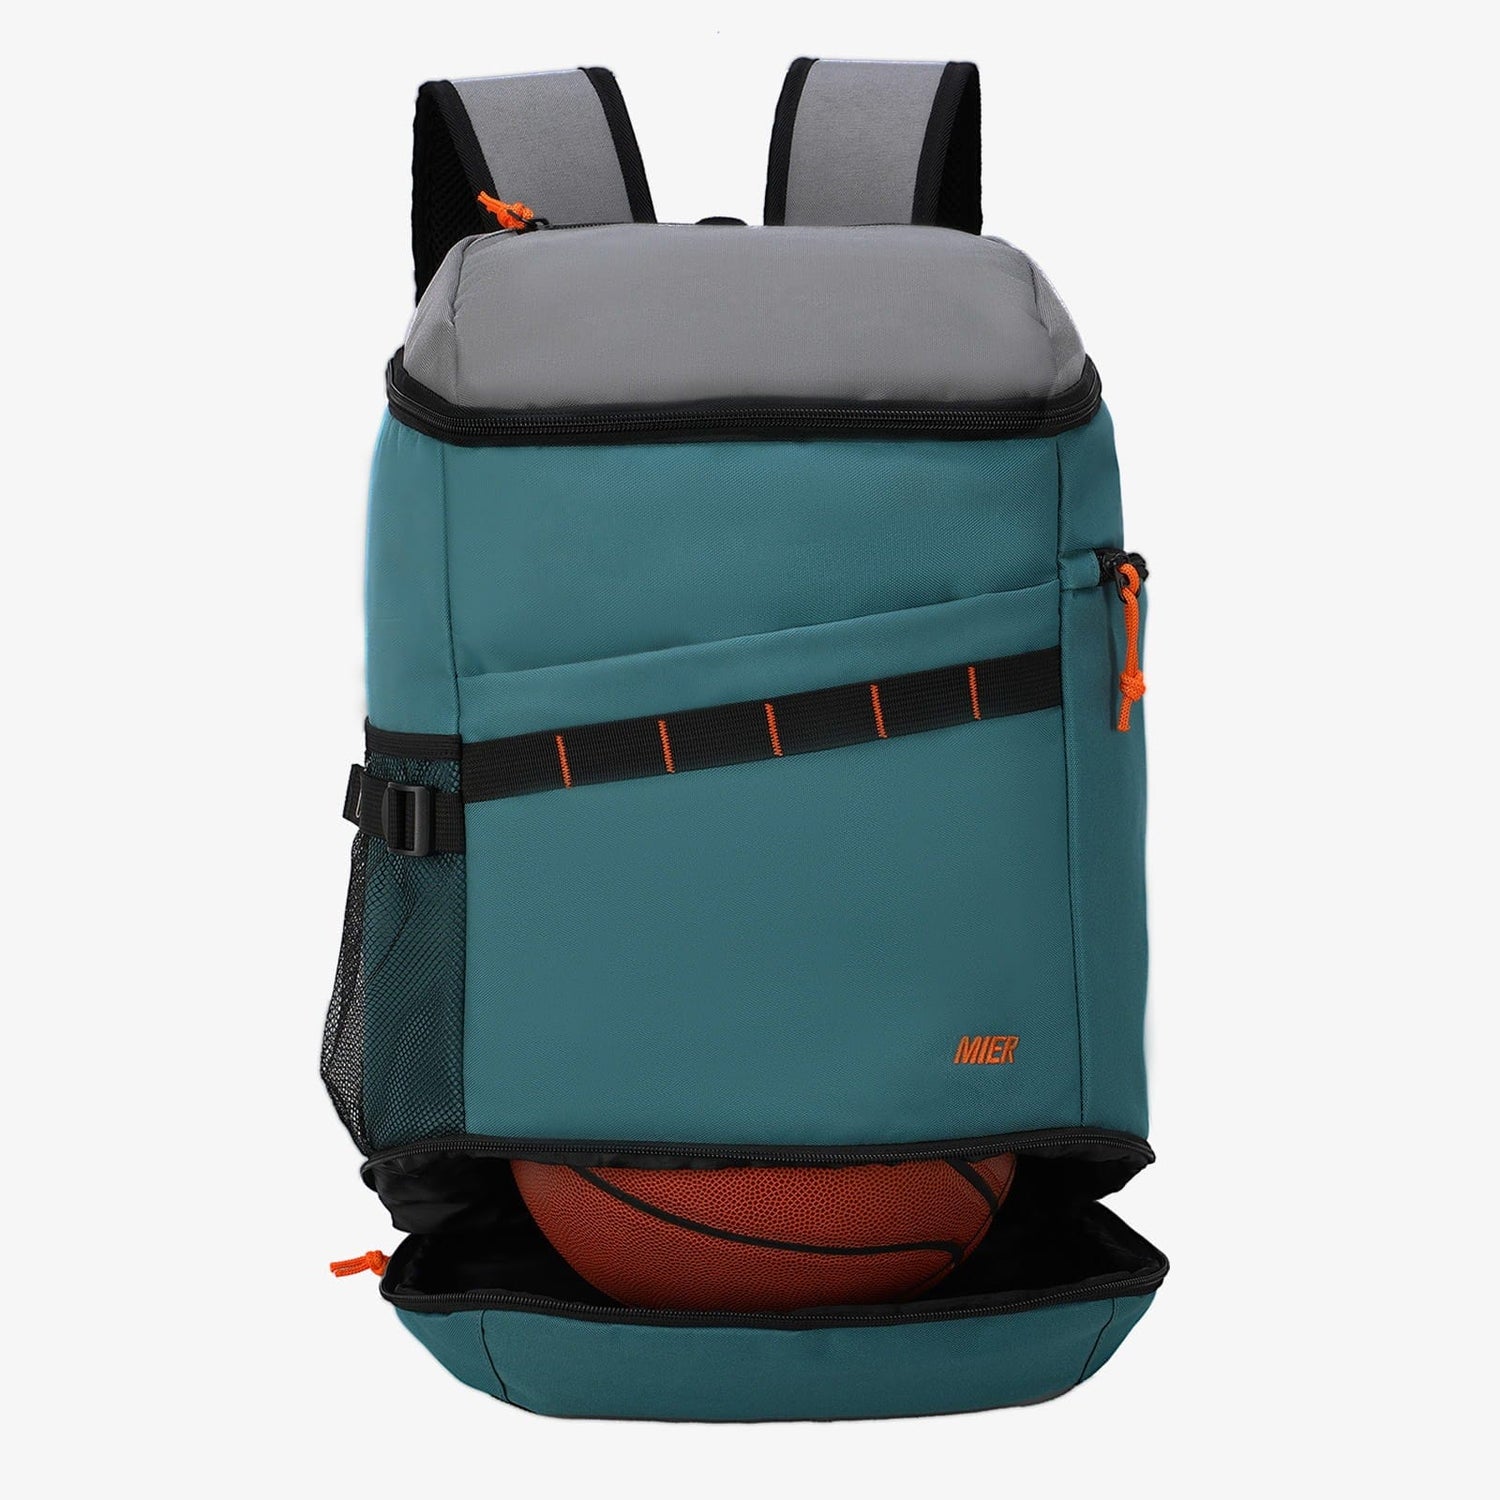 Basketball Backpack Soccer Bag with Shoes Compartment Backpack Bag Green Gray MIER